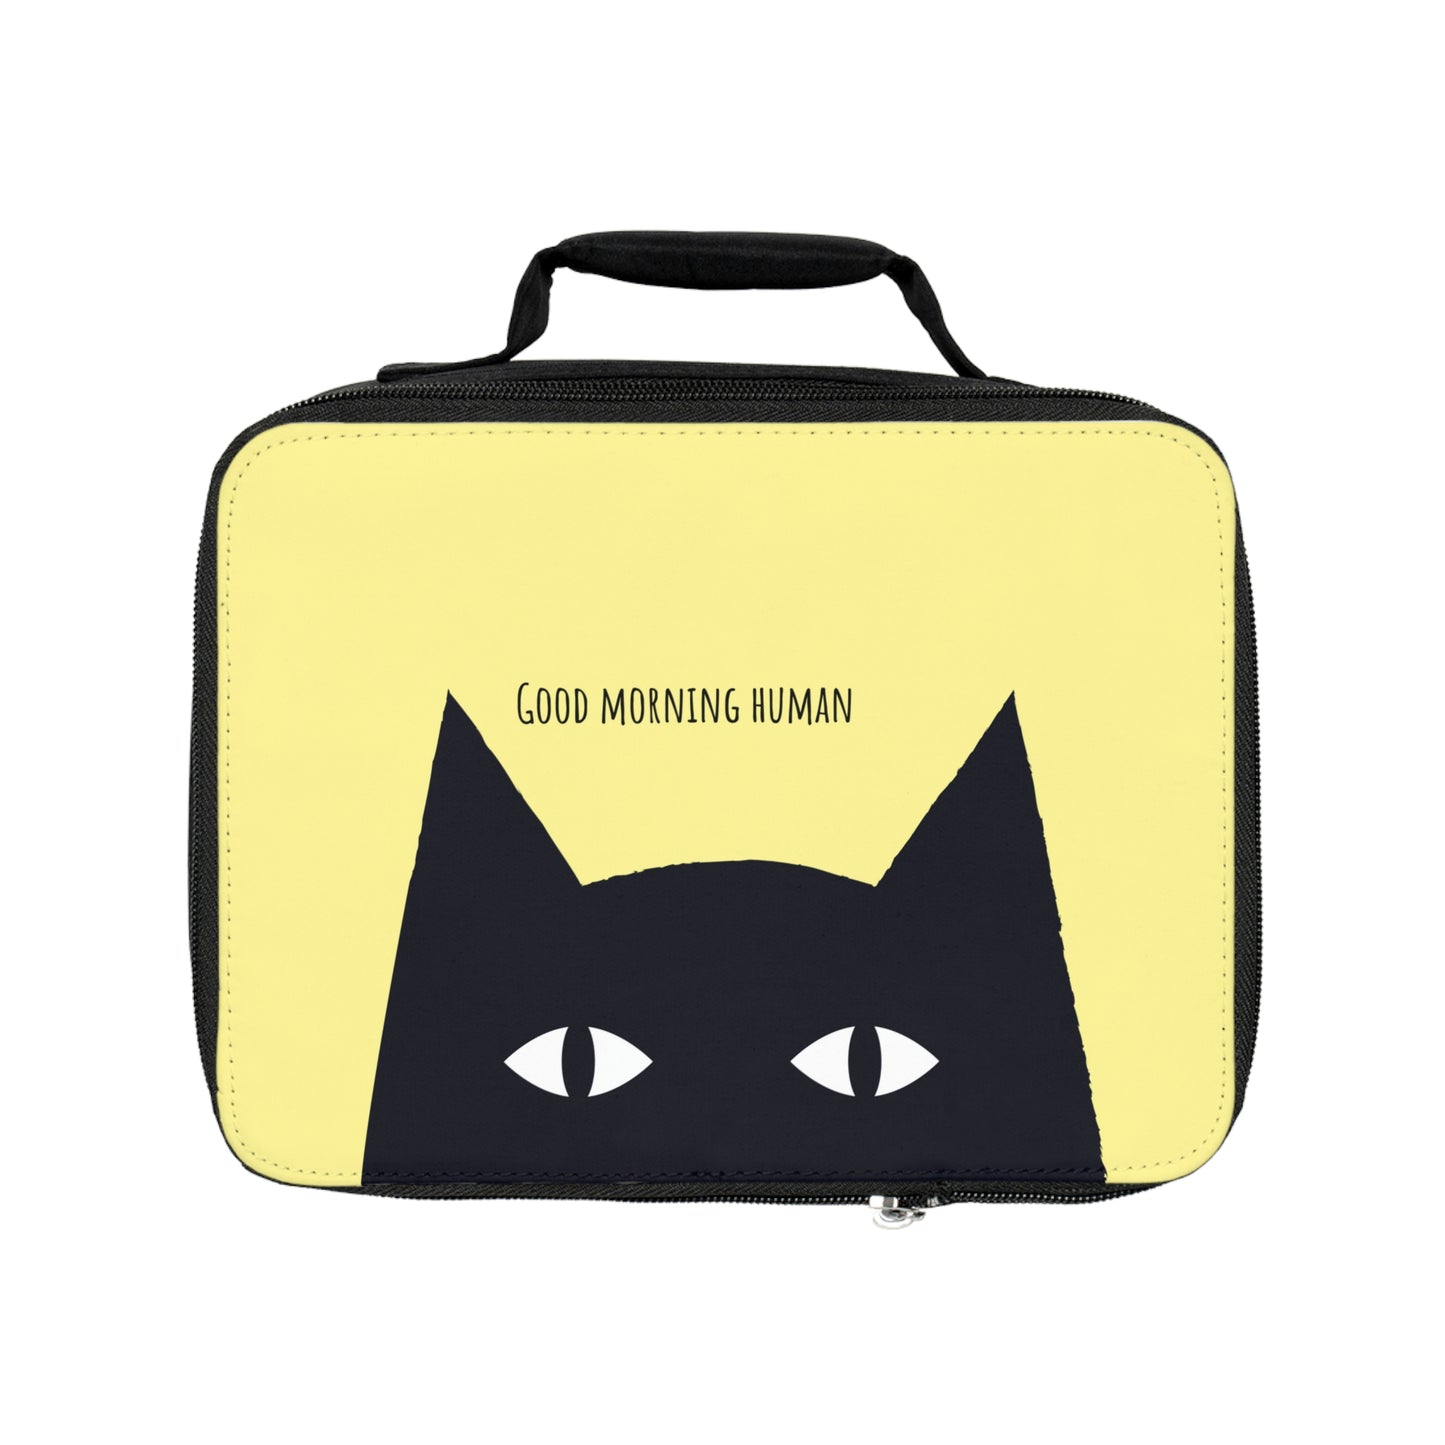 Cute kawaii cat lunch bag, Black Cat says Good Morning Human yellow Lunch Bag, funny cat lunch tote, back to school, cat lovers gift